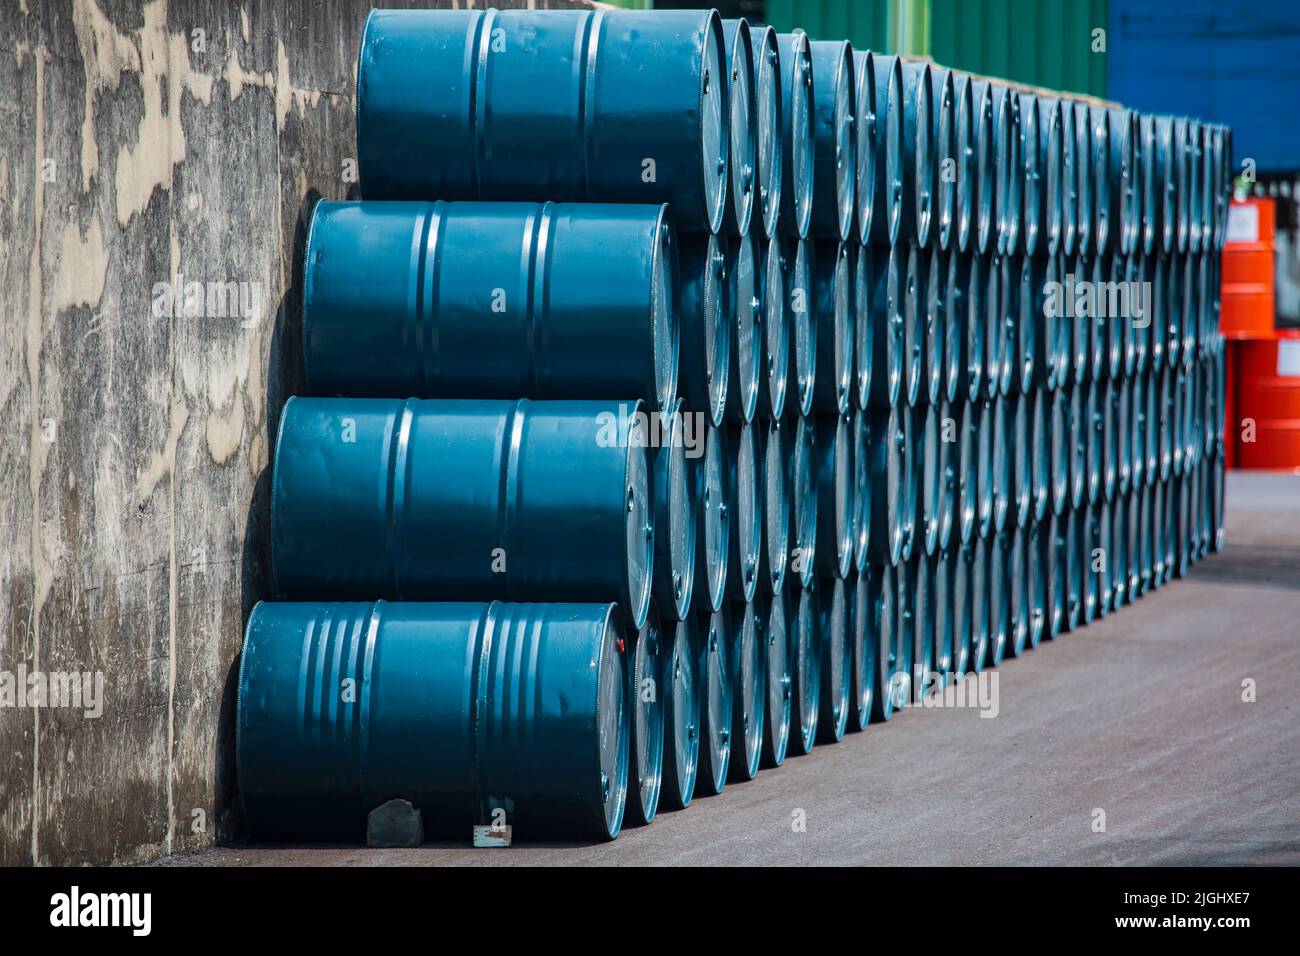 https://c8.alamy.com/comp/2JGHXE7/oil-barrels-green-or-chemical-drums-horizontal-stacked-up-2JGHXE7.jpg